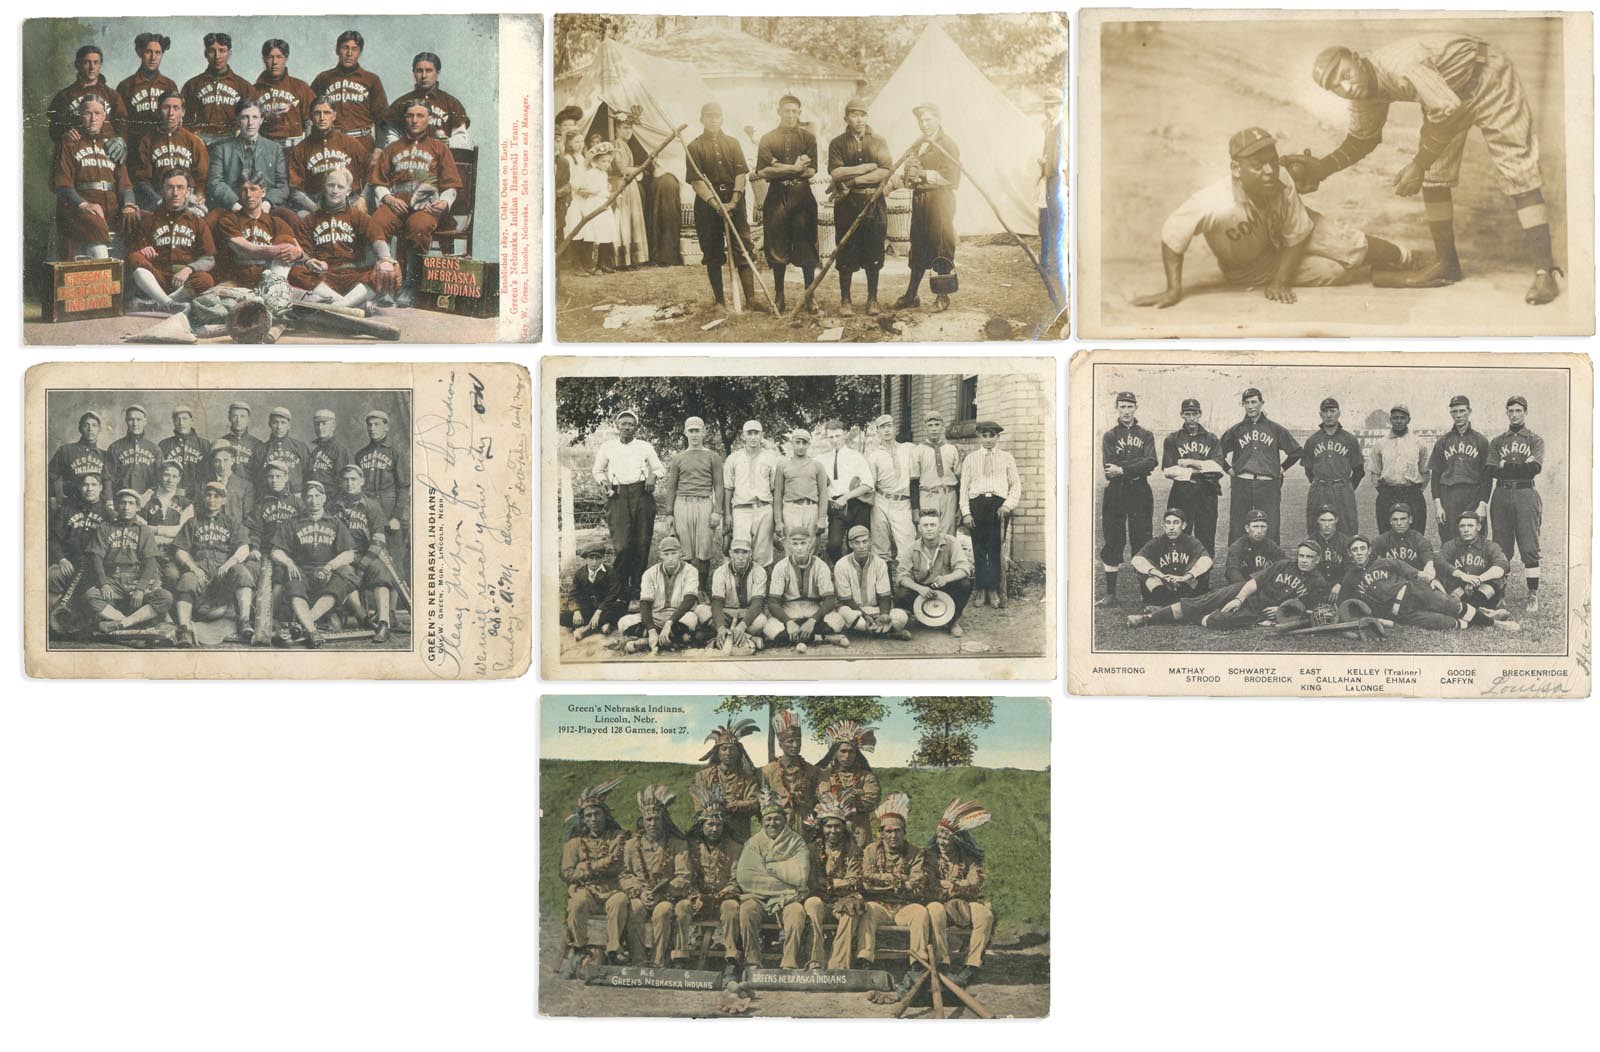 Negro League, Latin, Japanese & International Base - Early 1900's Native American & Ethnographic Postcard collection (11)